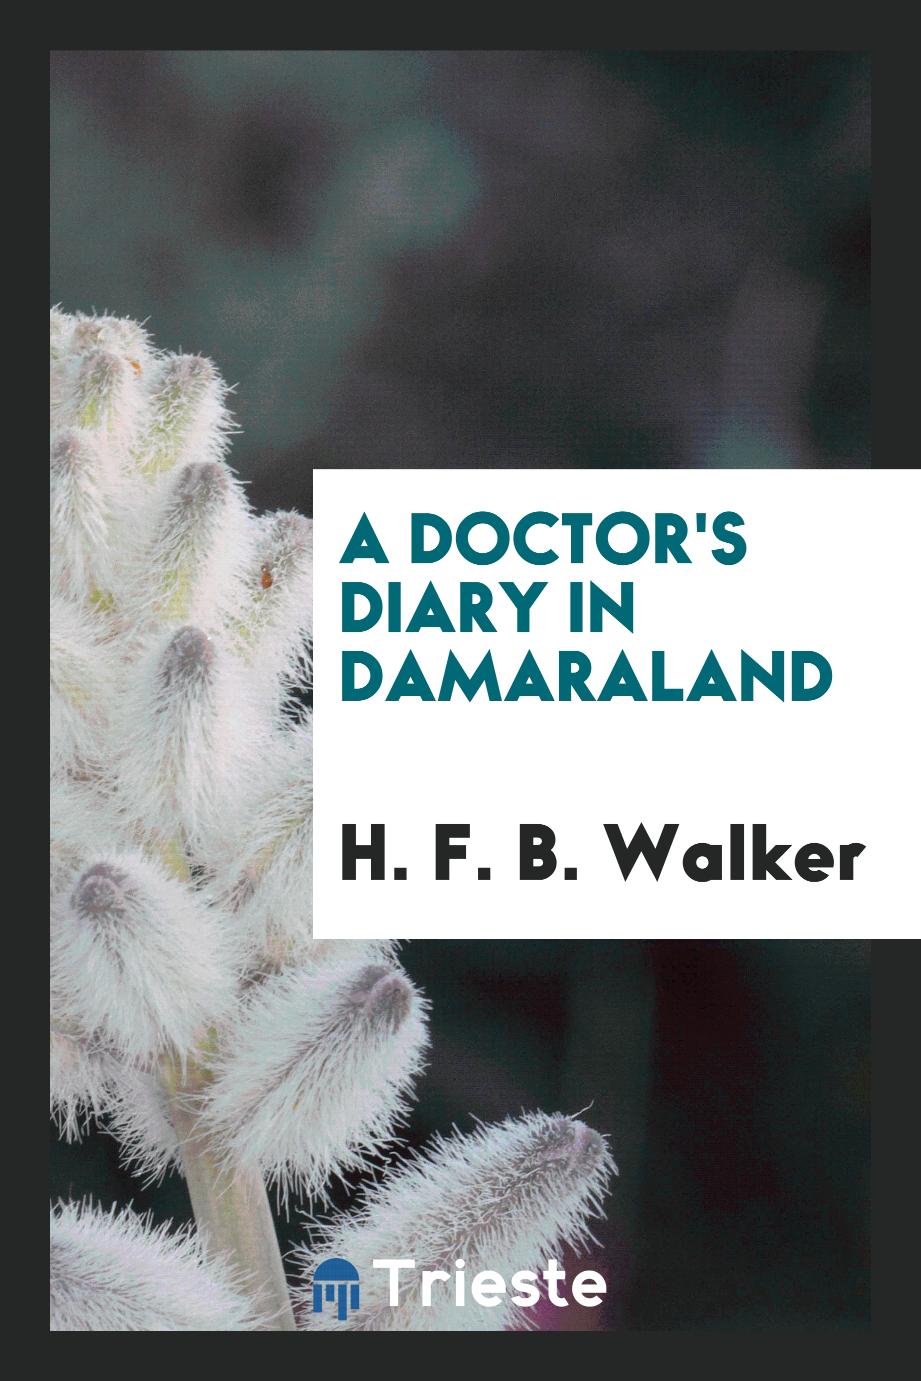 A doctor's diary in Damaraland